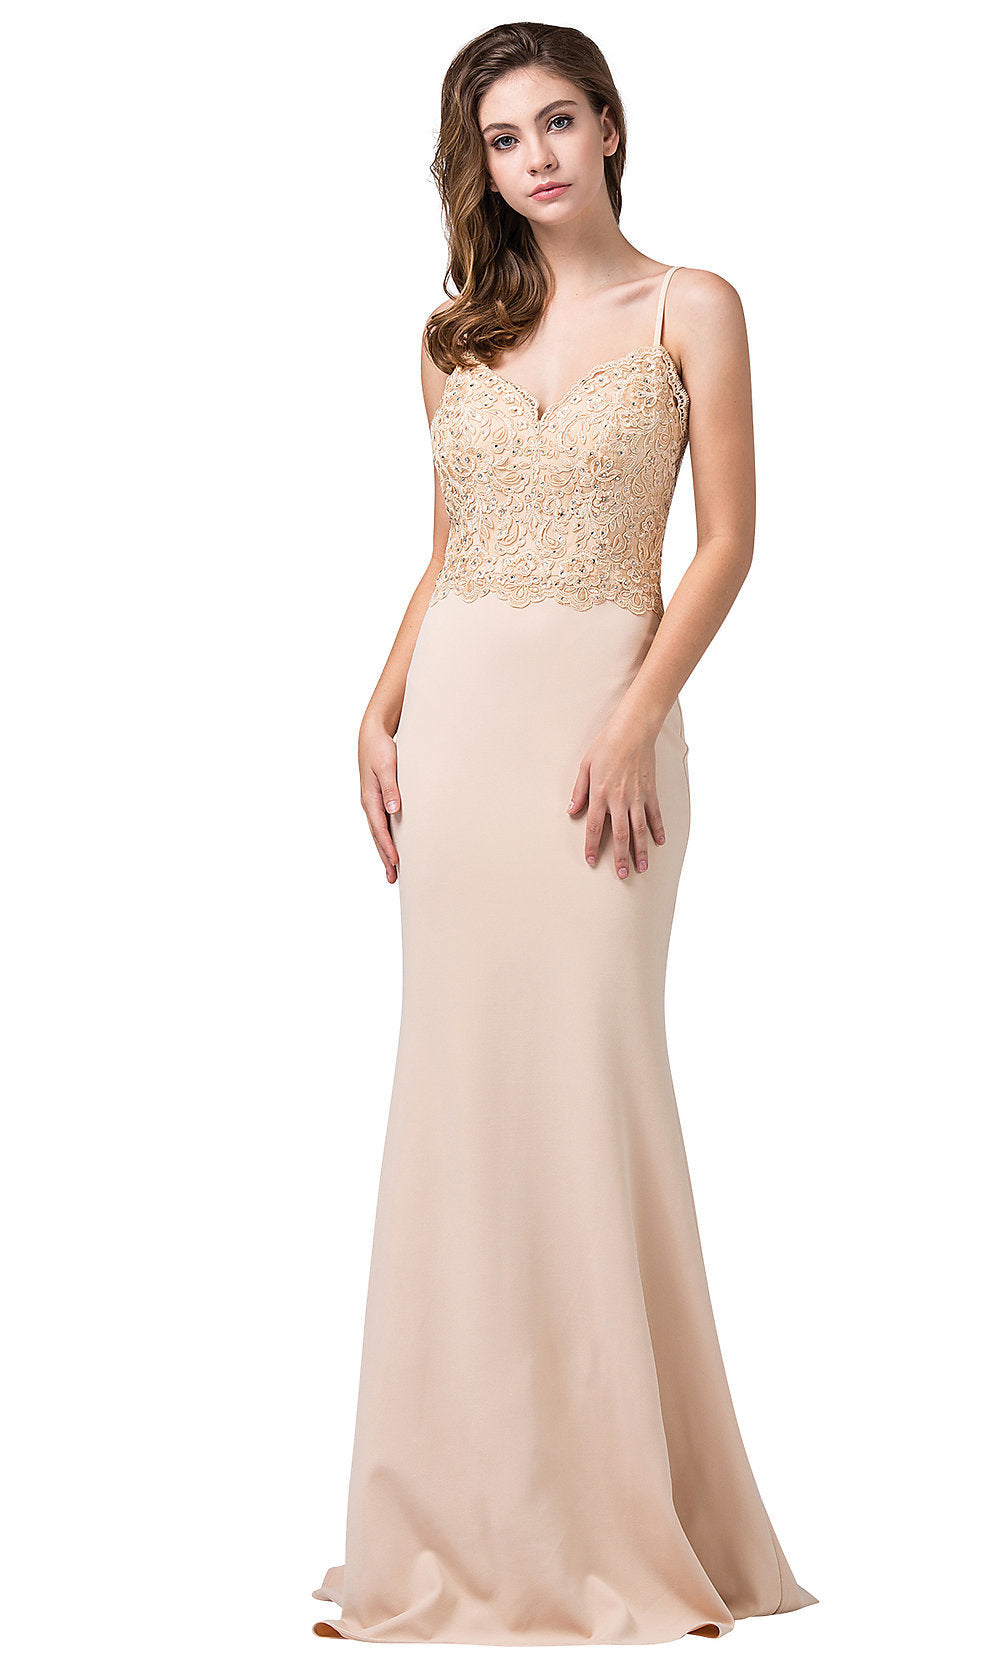 Champagne Sheath Formal Evening Dress with Lace Bodice